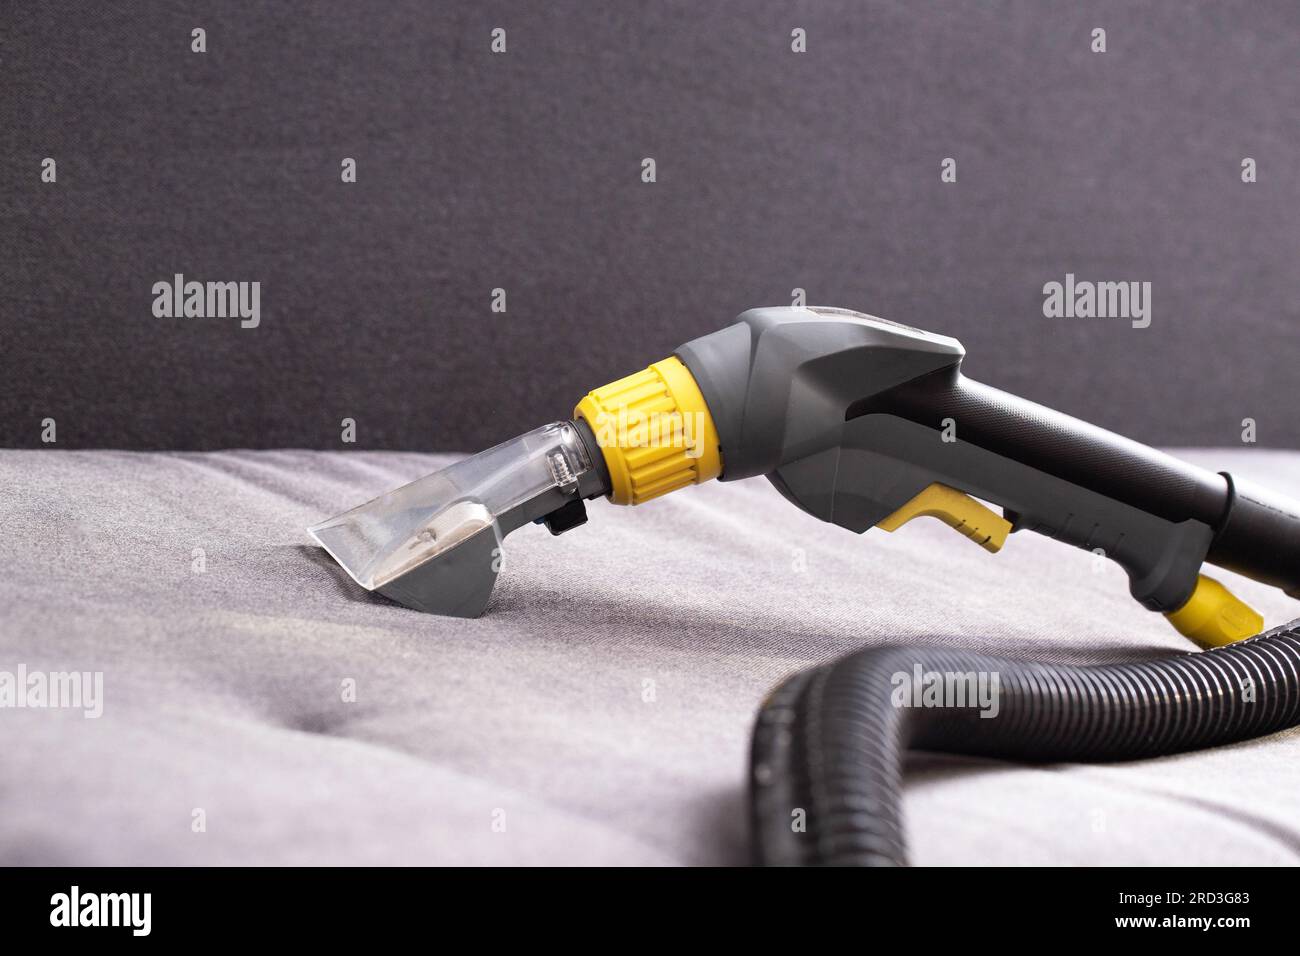 A professional washing vacuum cleaner for dry cleaning lies on a black sofa, close-up. Concept service for cleaning upholstered furniture. Stock Photo